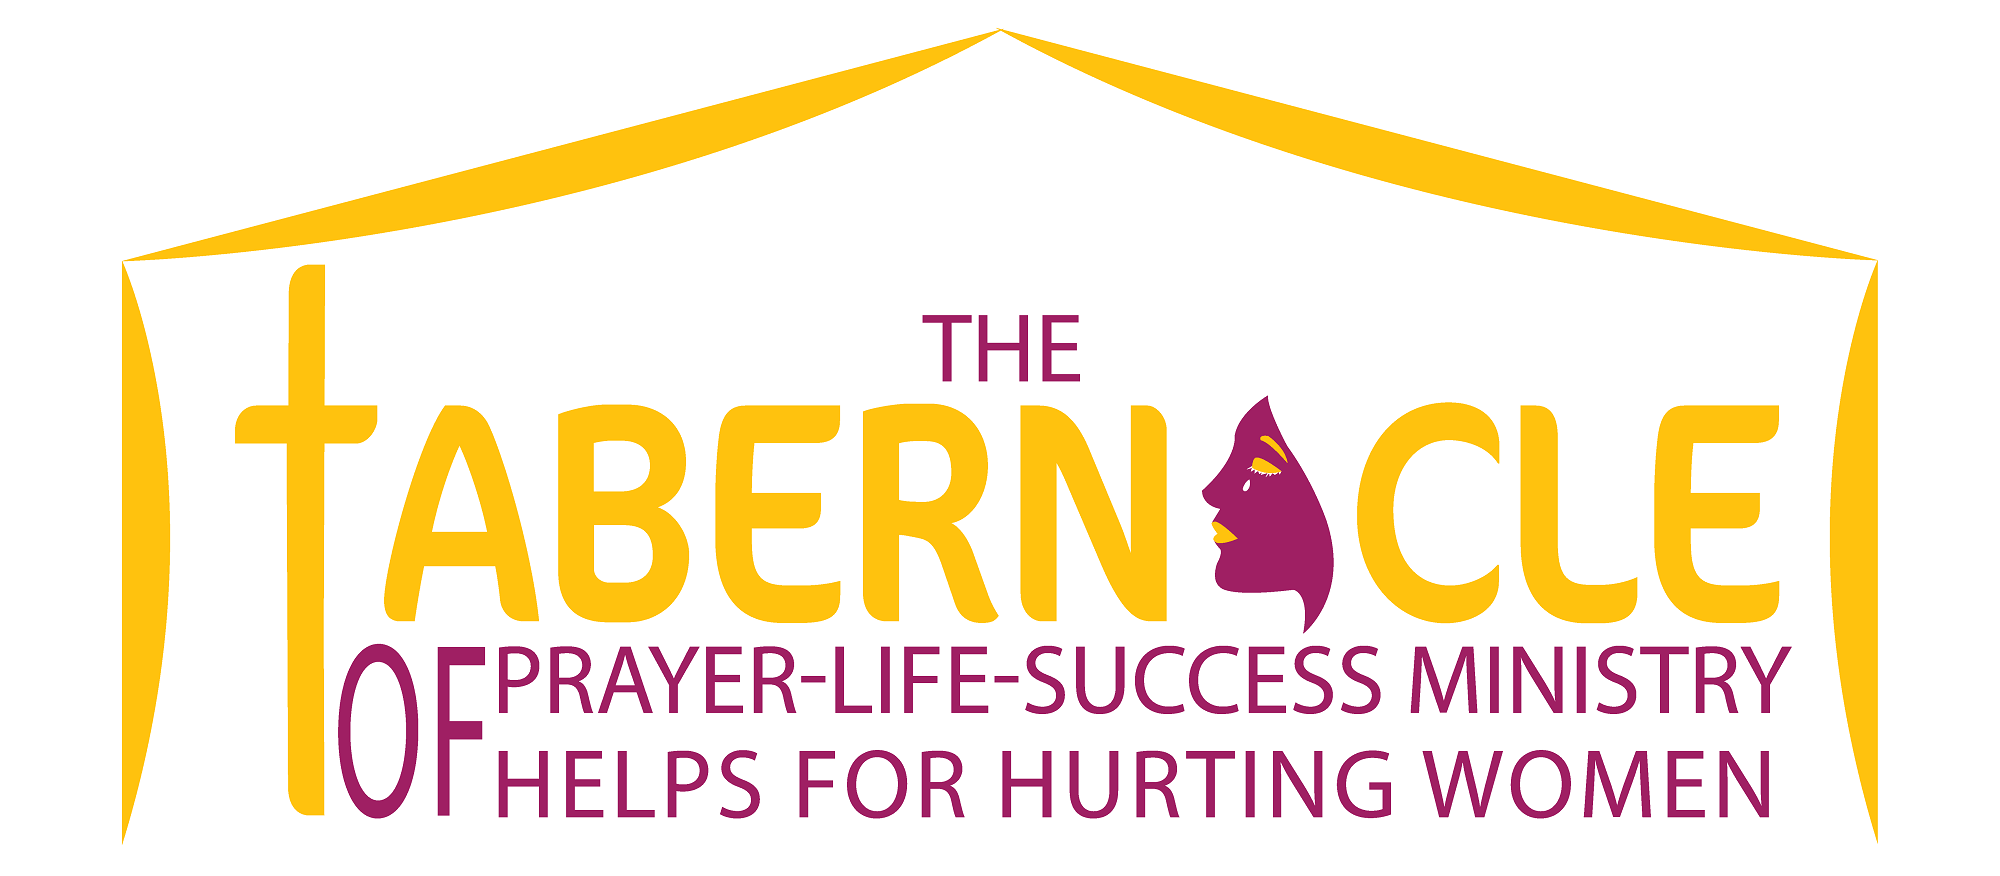 The Tabernacle of Prayer-Life-Success